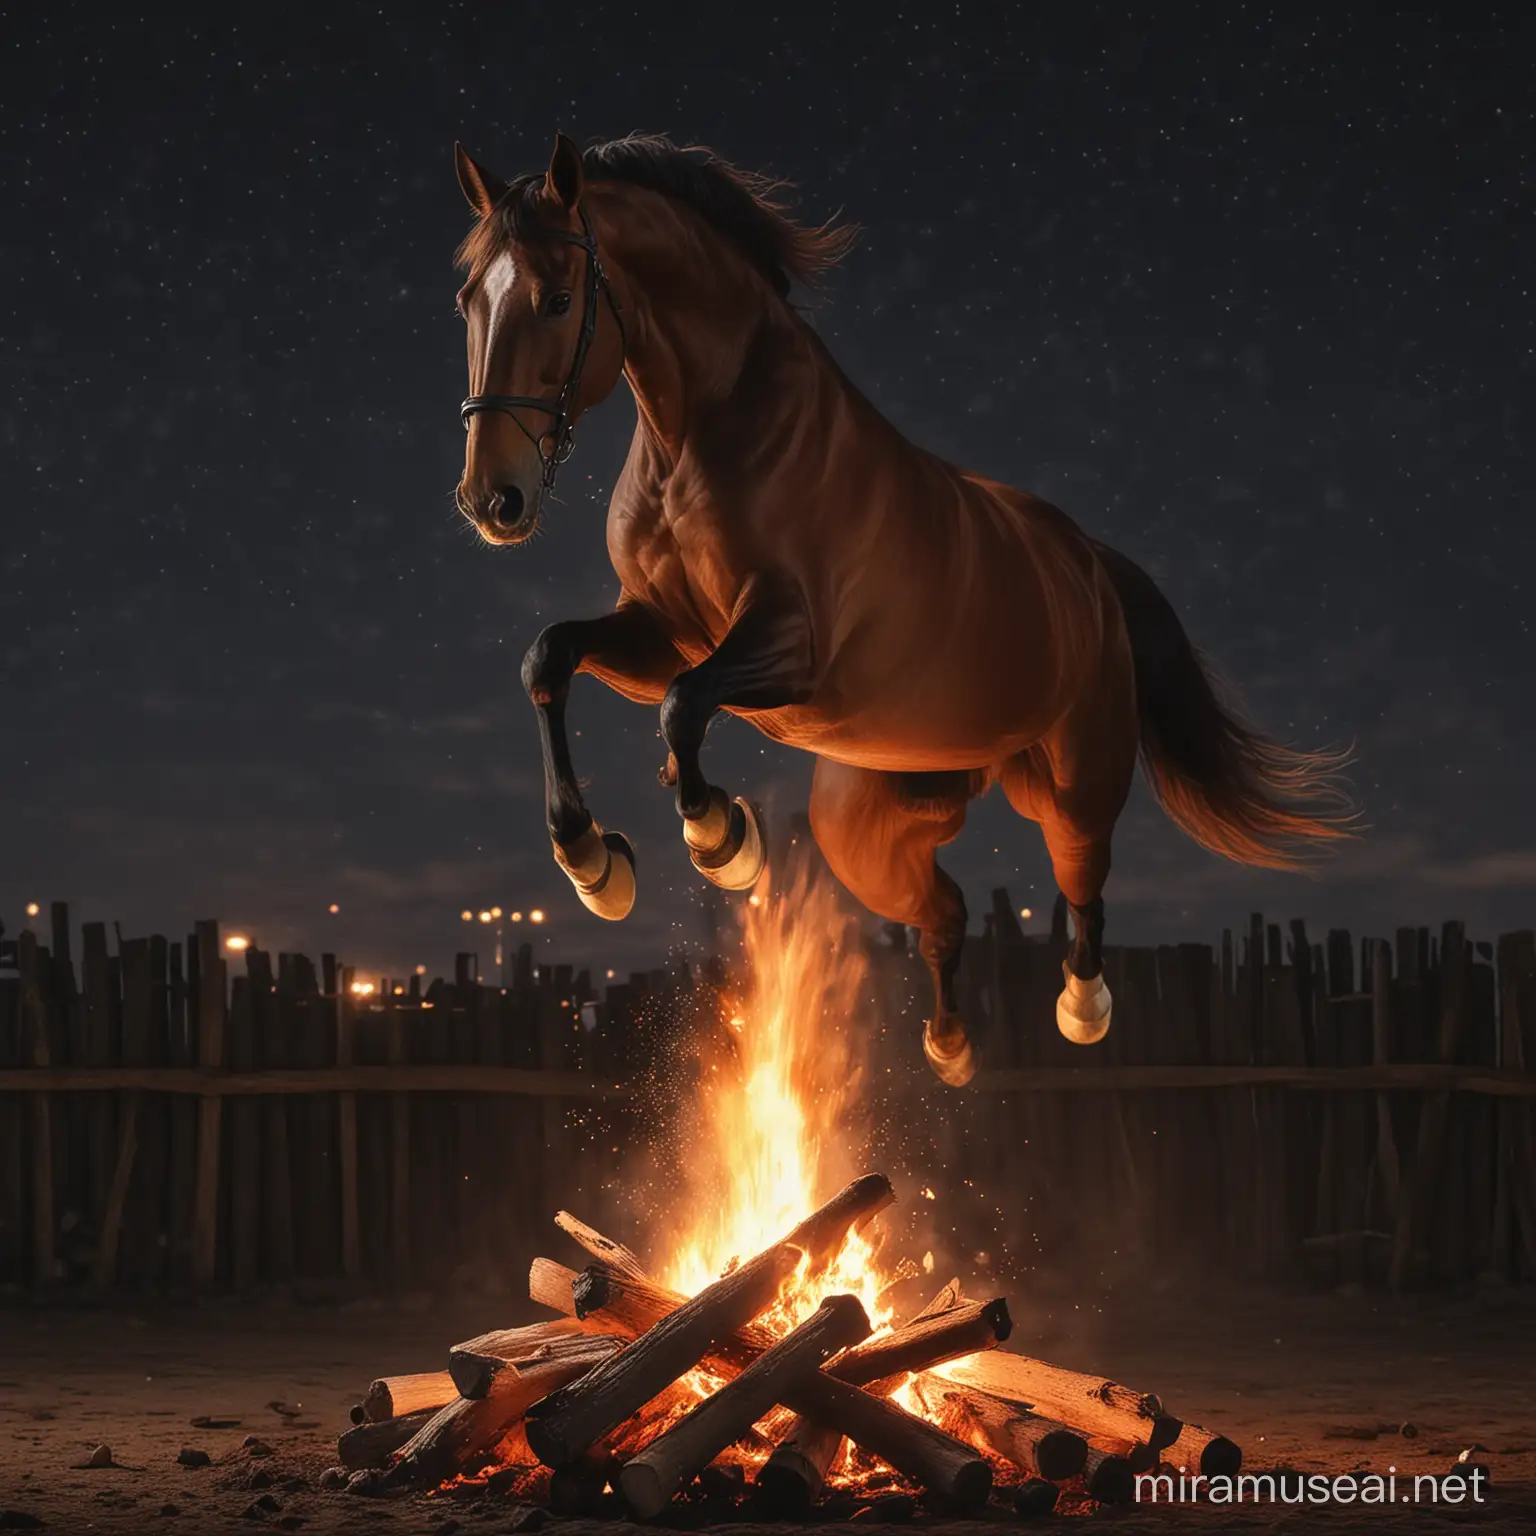 Bay Horse Jumping Over Bonfire Equestrian Nighttime Spectacle